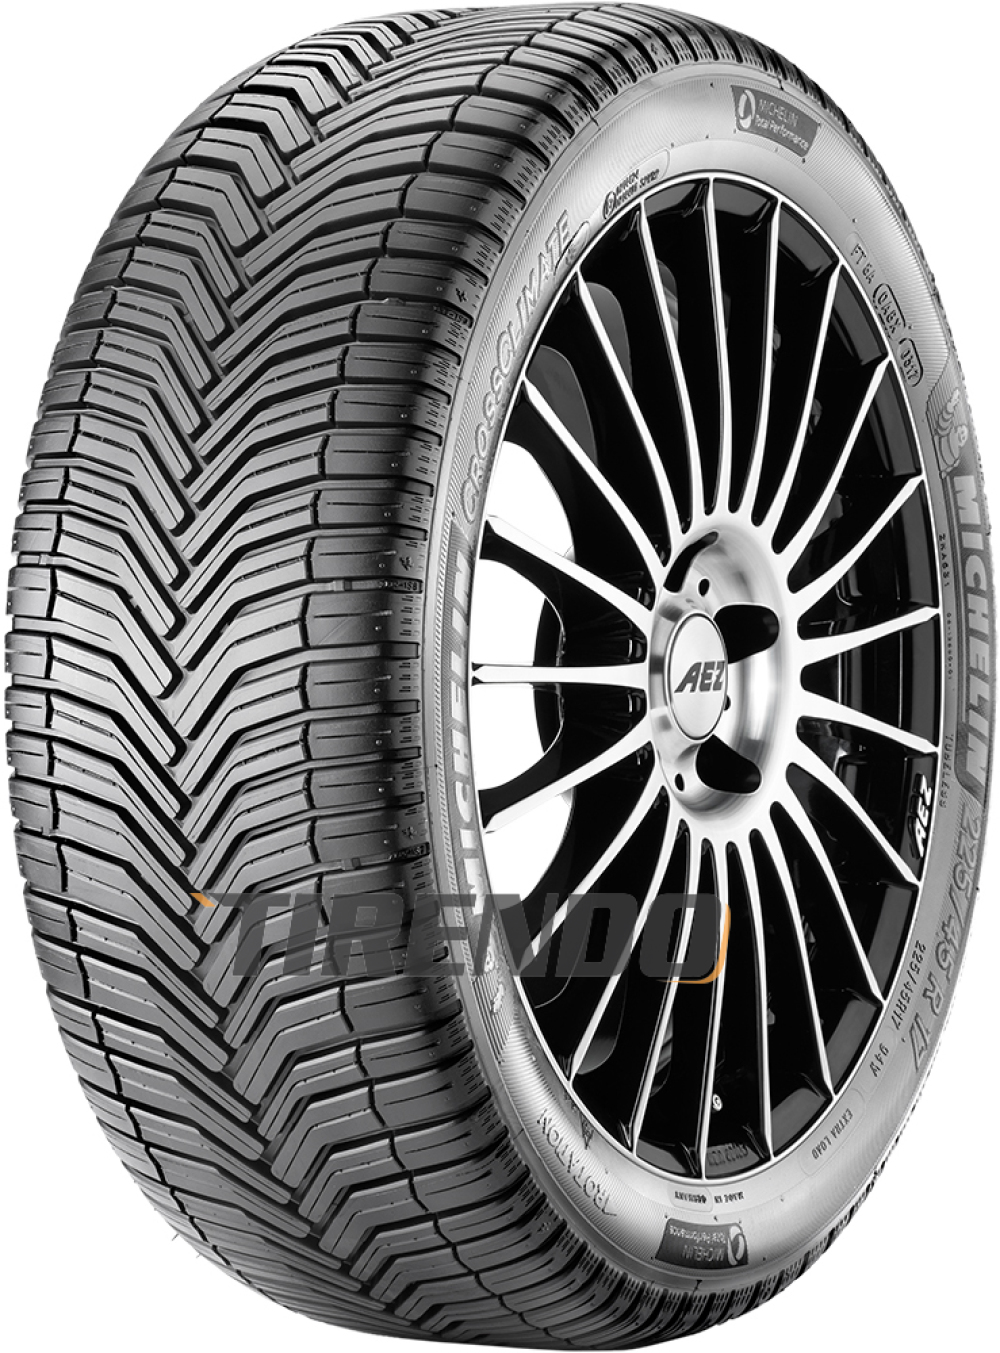 Image of Michelin CrossClimate ( 185/65 R15 92T XL )